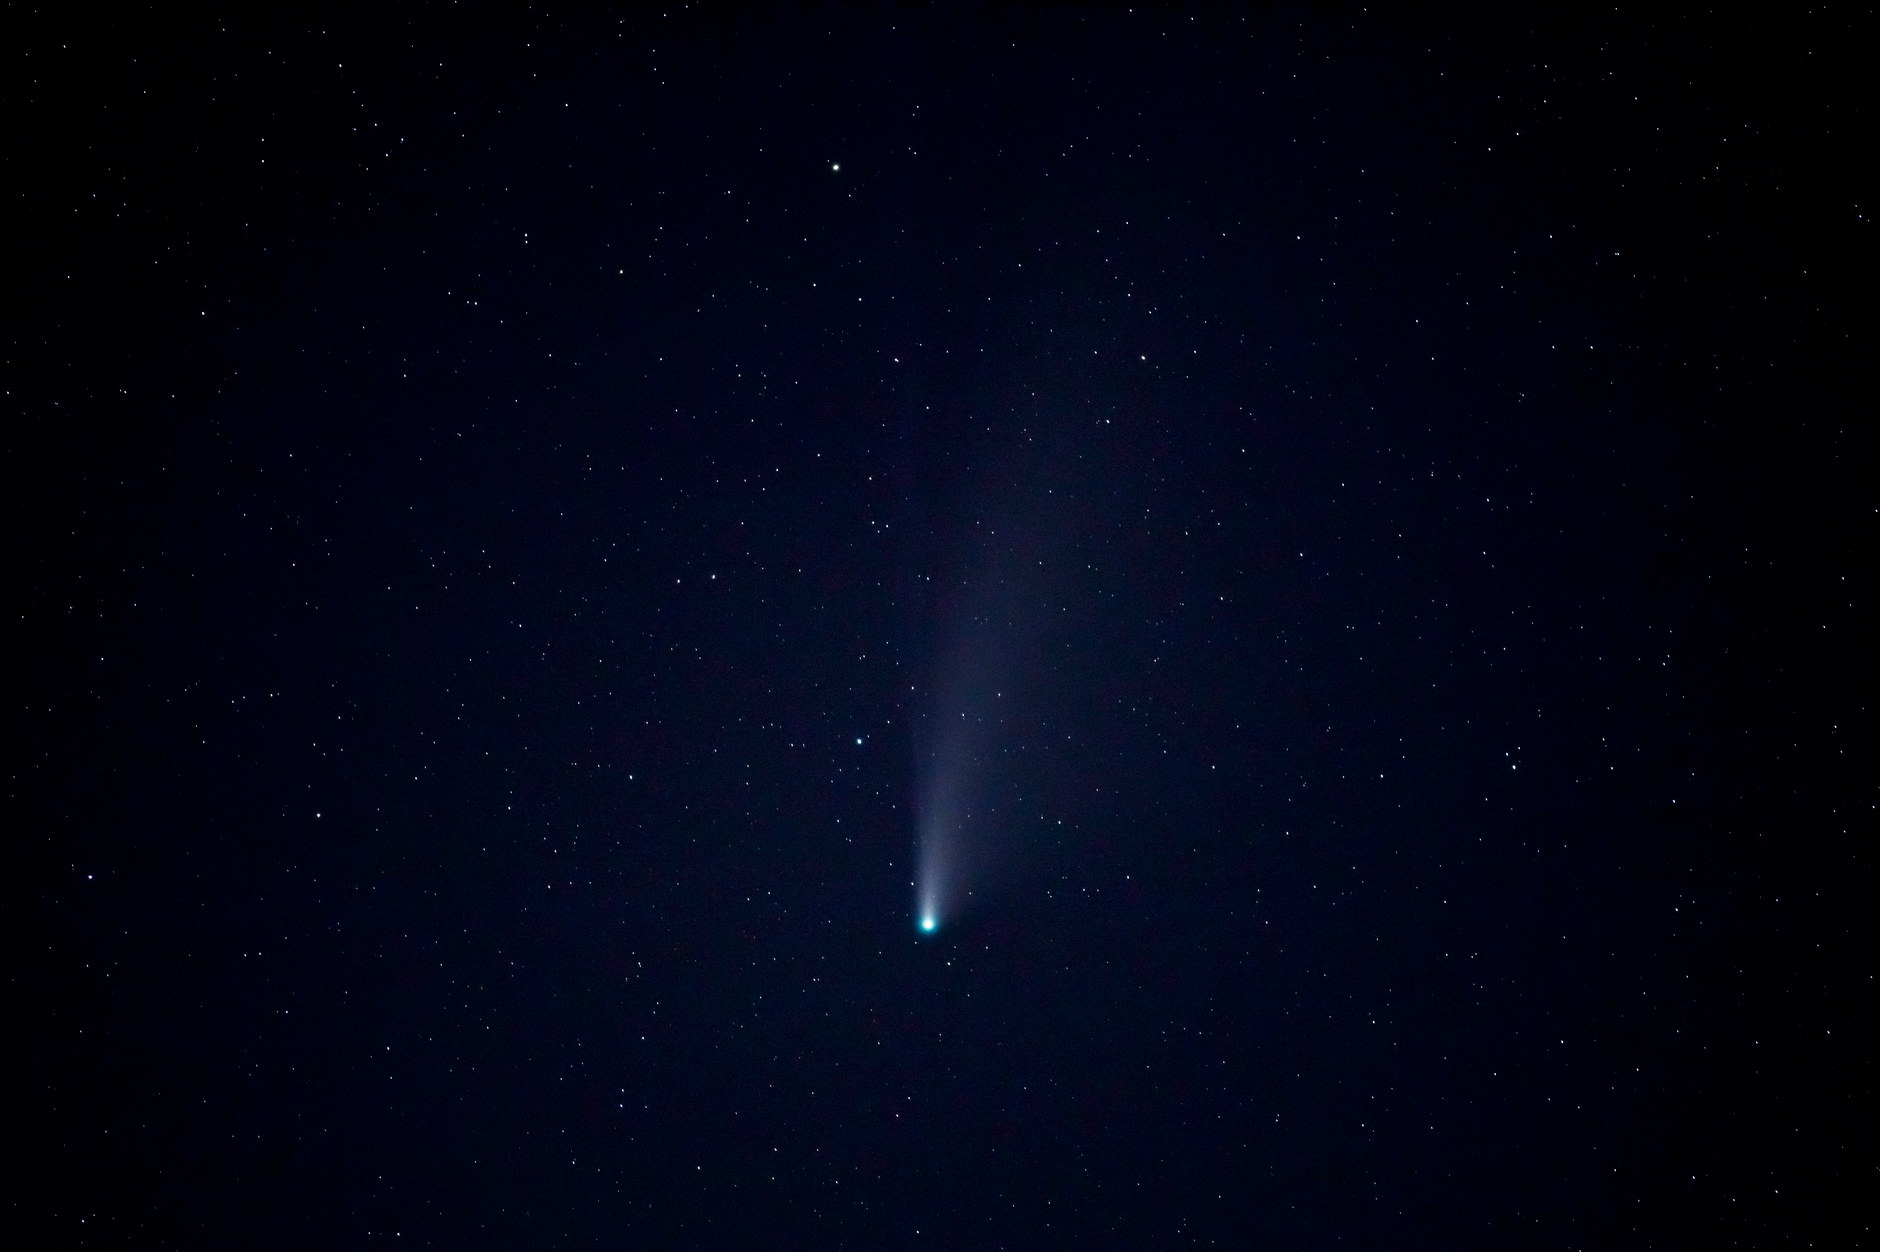 Comet NEOWISE is seen in the night sky near the Tulip Viaduct in rural Greene County, Indiana on Thursday, July 23, 2020. The comet, also known as C/2020 F3, is three-miles wide in diameter traveling at 144,000 mph about 70 million miles from Earth. (Photo by James Brosher)